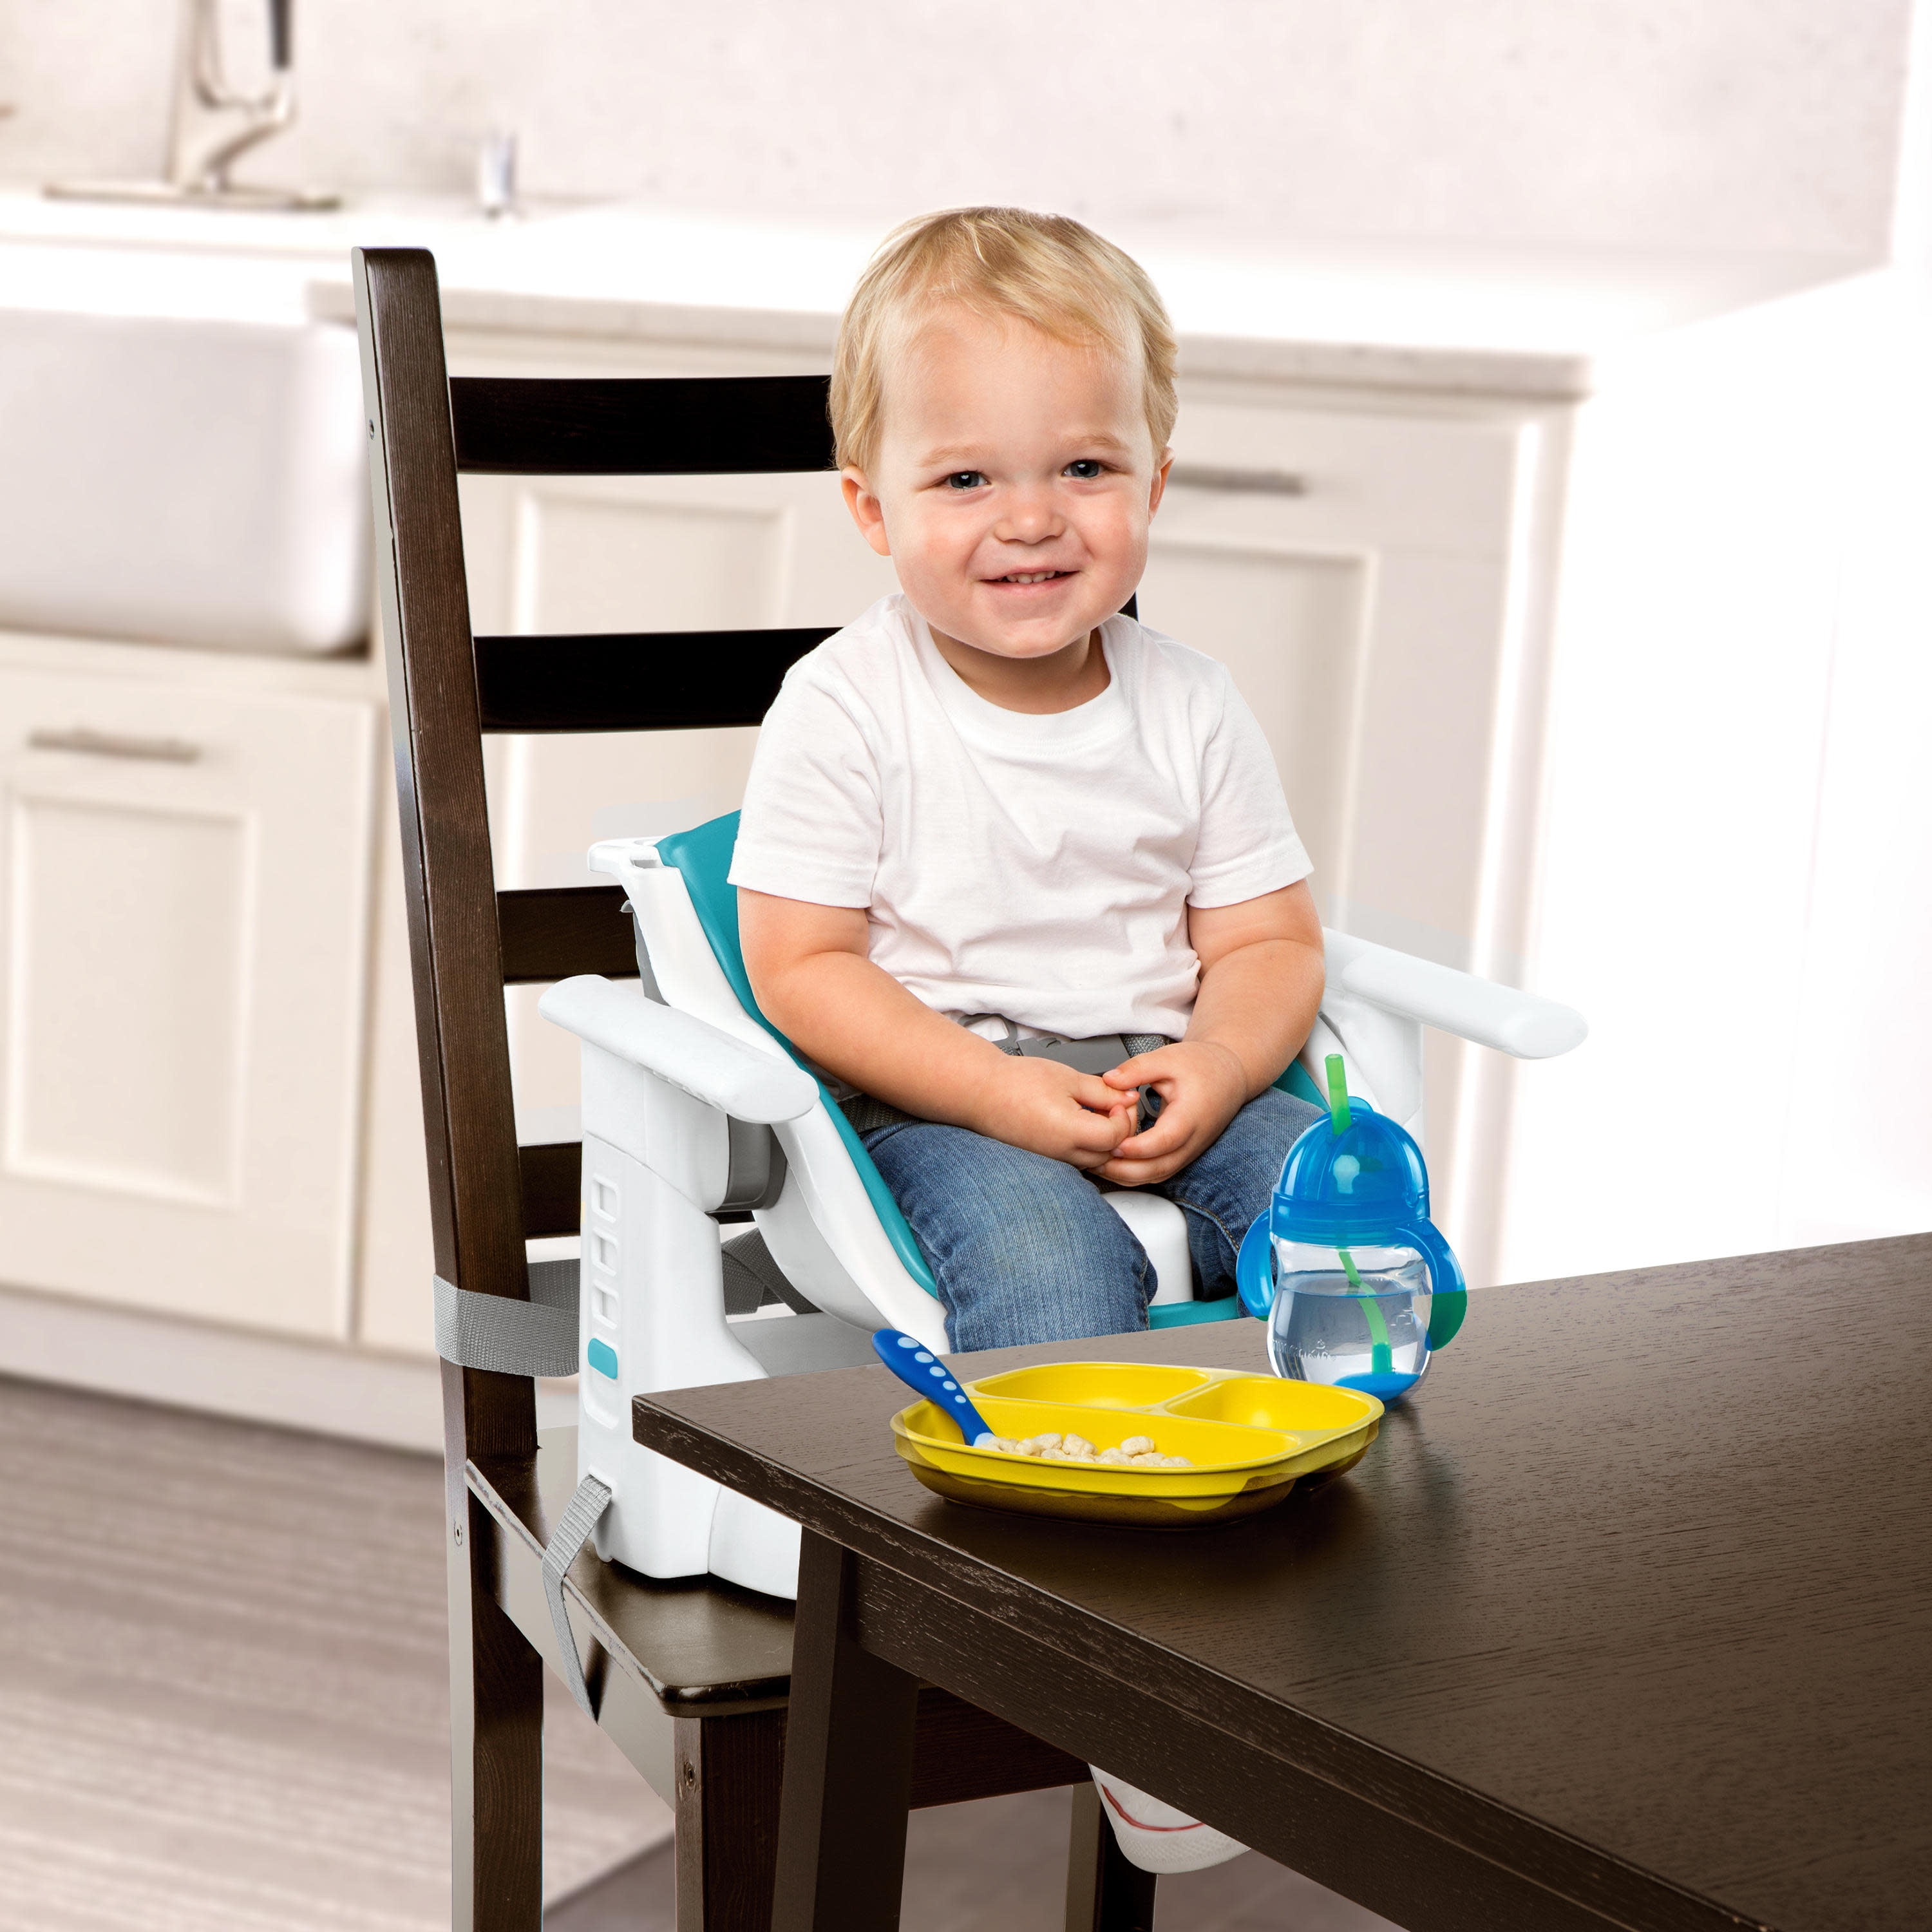 INGENUITY CHAIRMATE INFANT TO TODDLER HIGH CHAIR BOOSTER SEAT BENSON 11790  6M-3Y